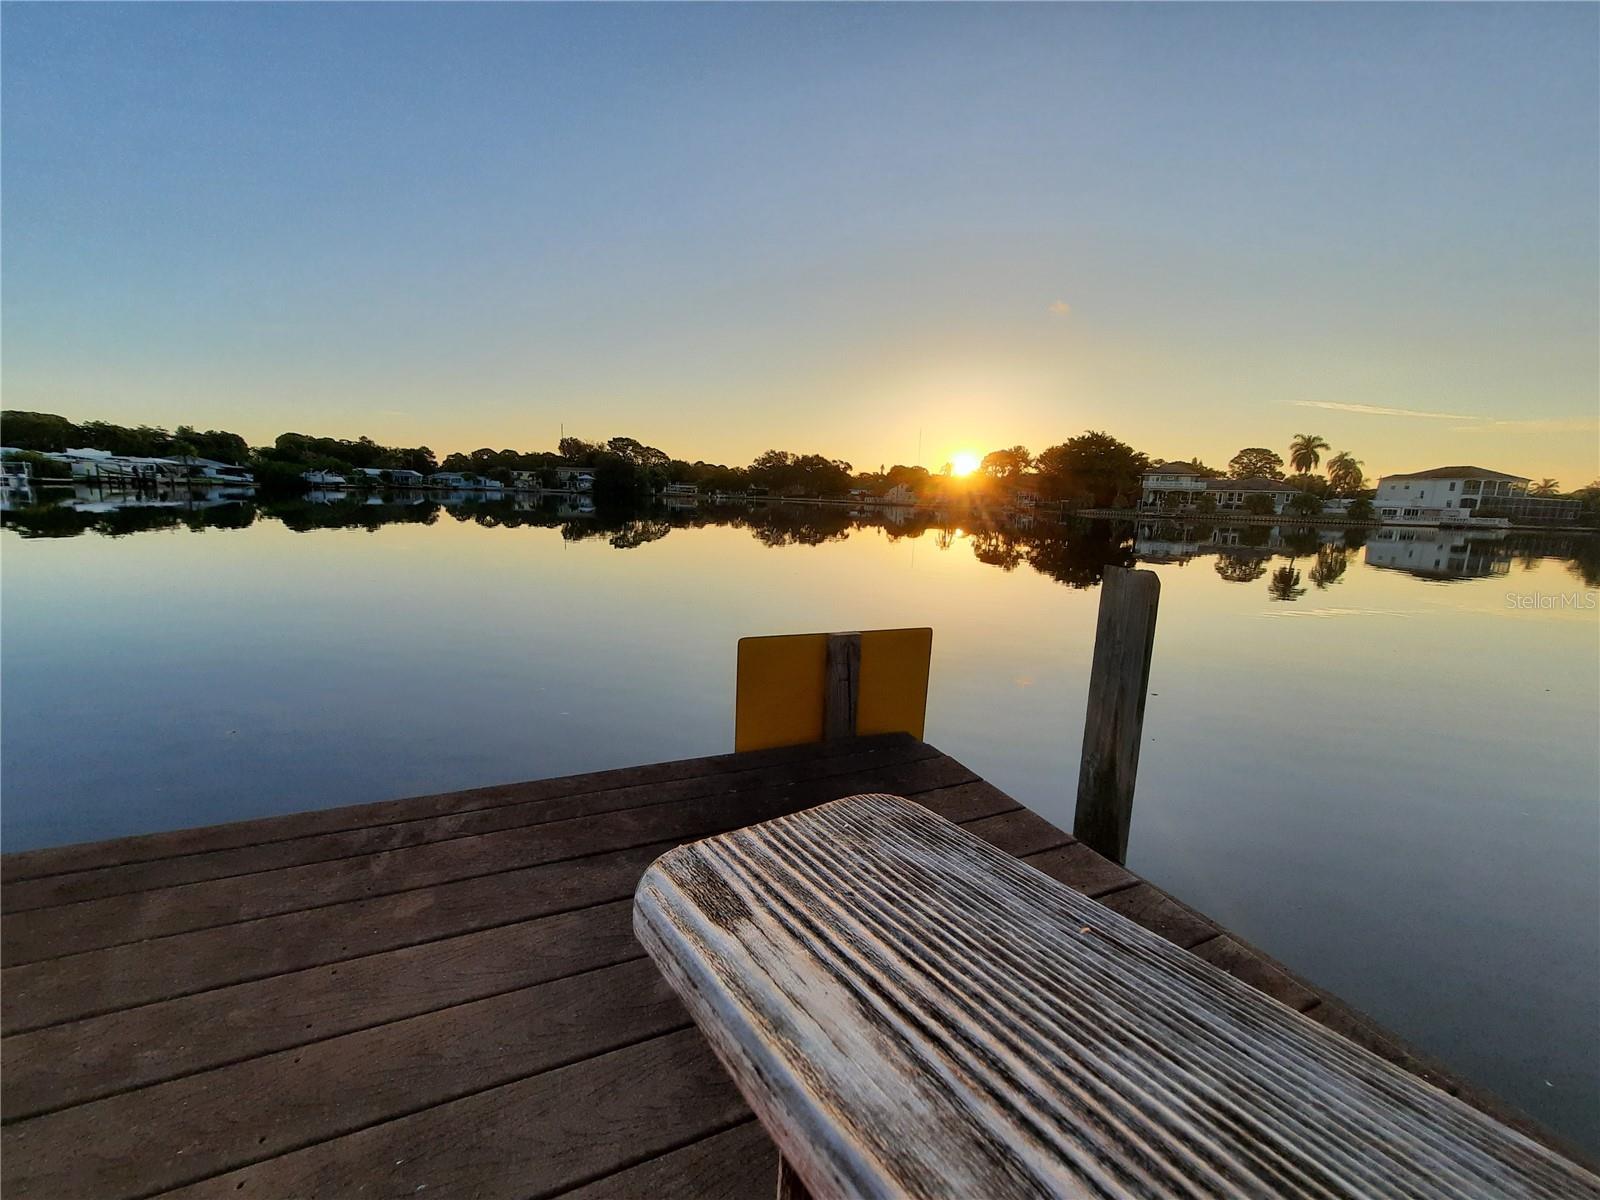 Sunrise from the dock